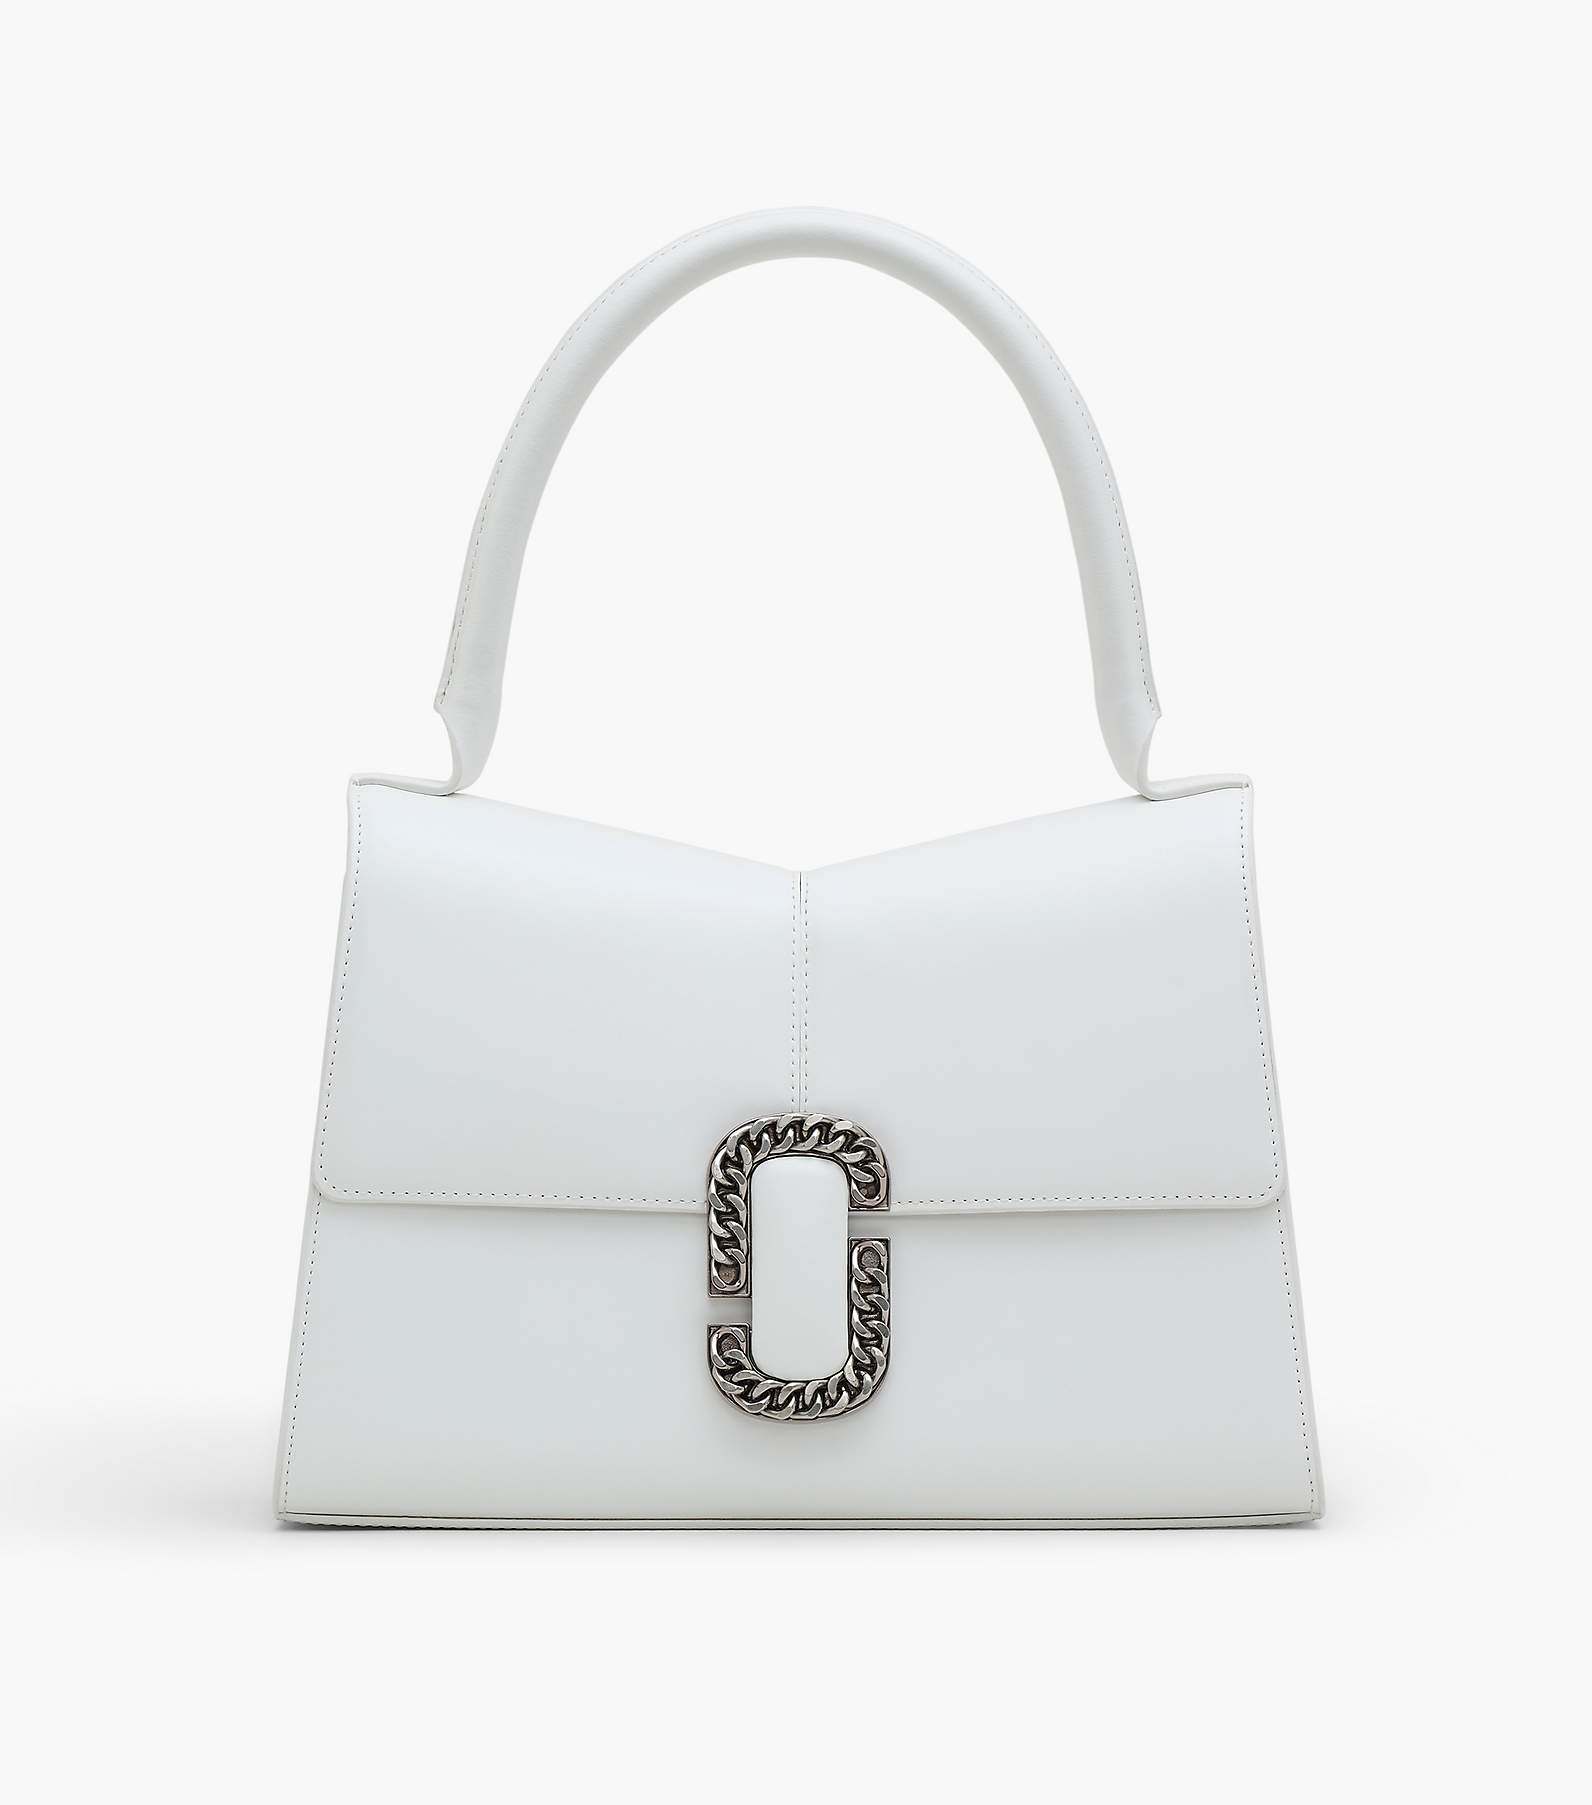 Marc Jacobs - Authenticated Handbag - Leather White Plain for Women, Never Worn, with Tag